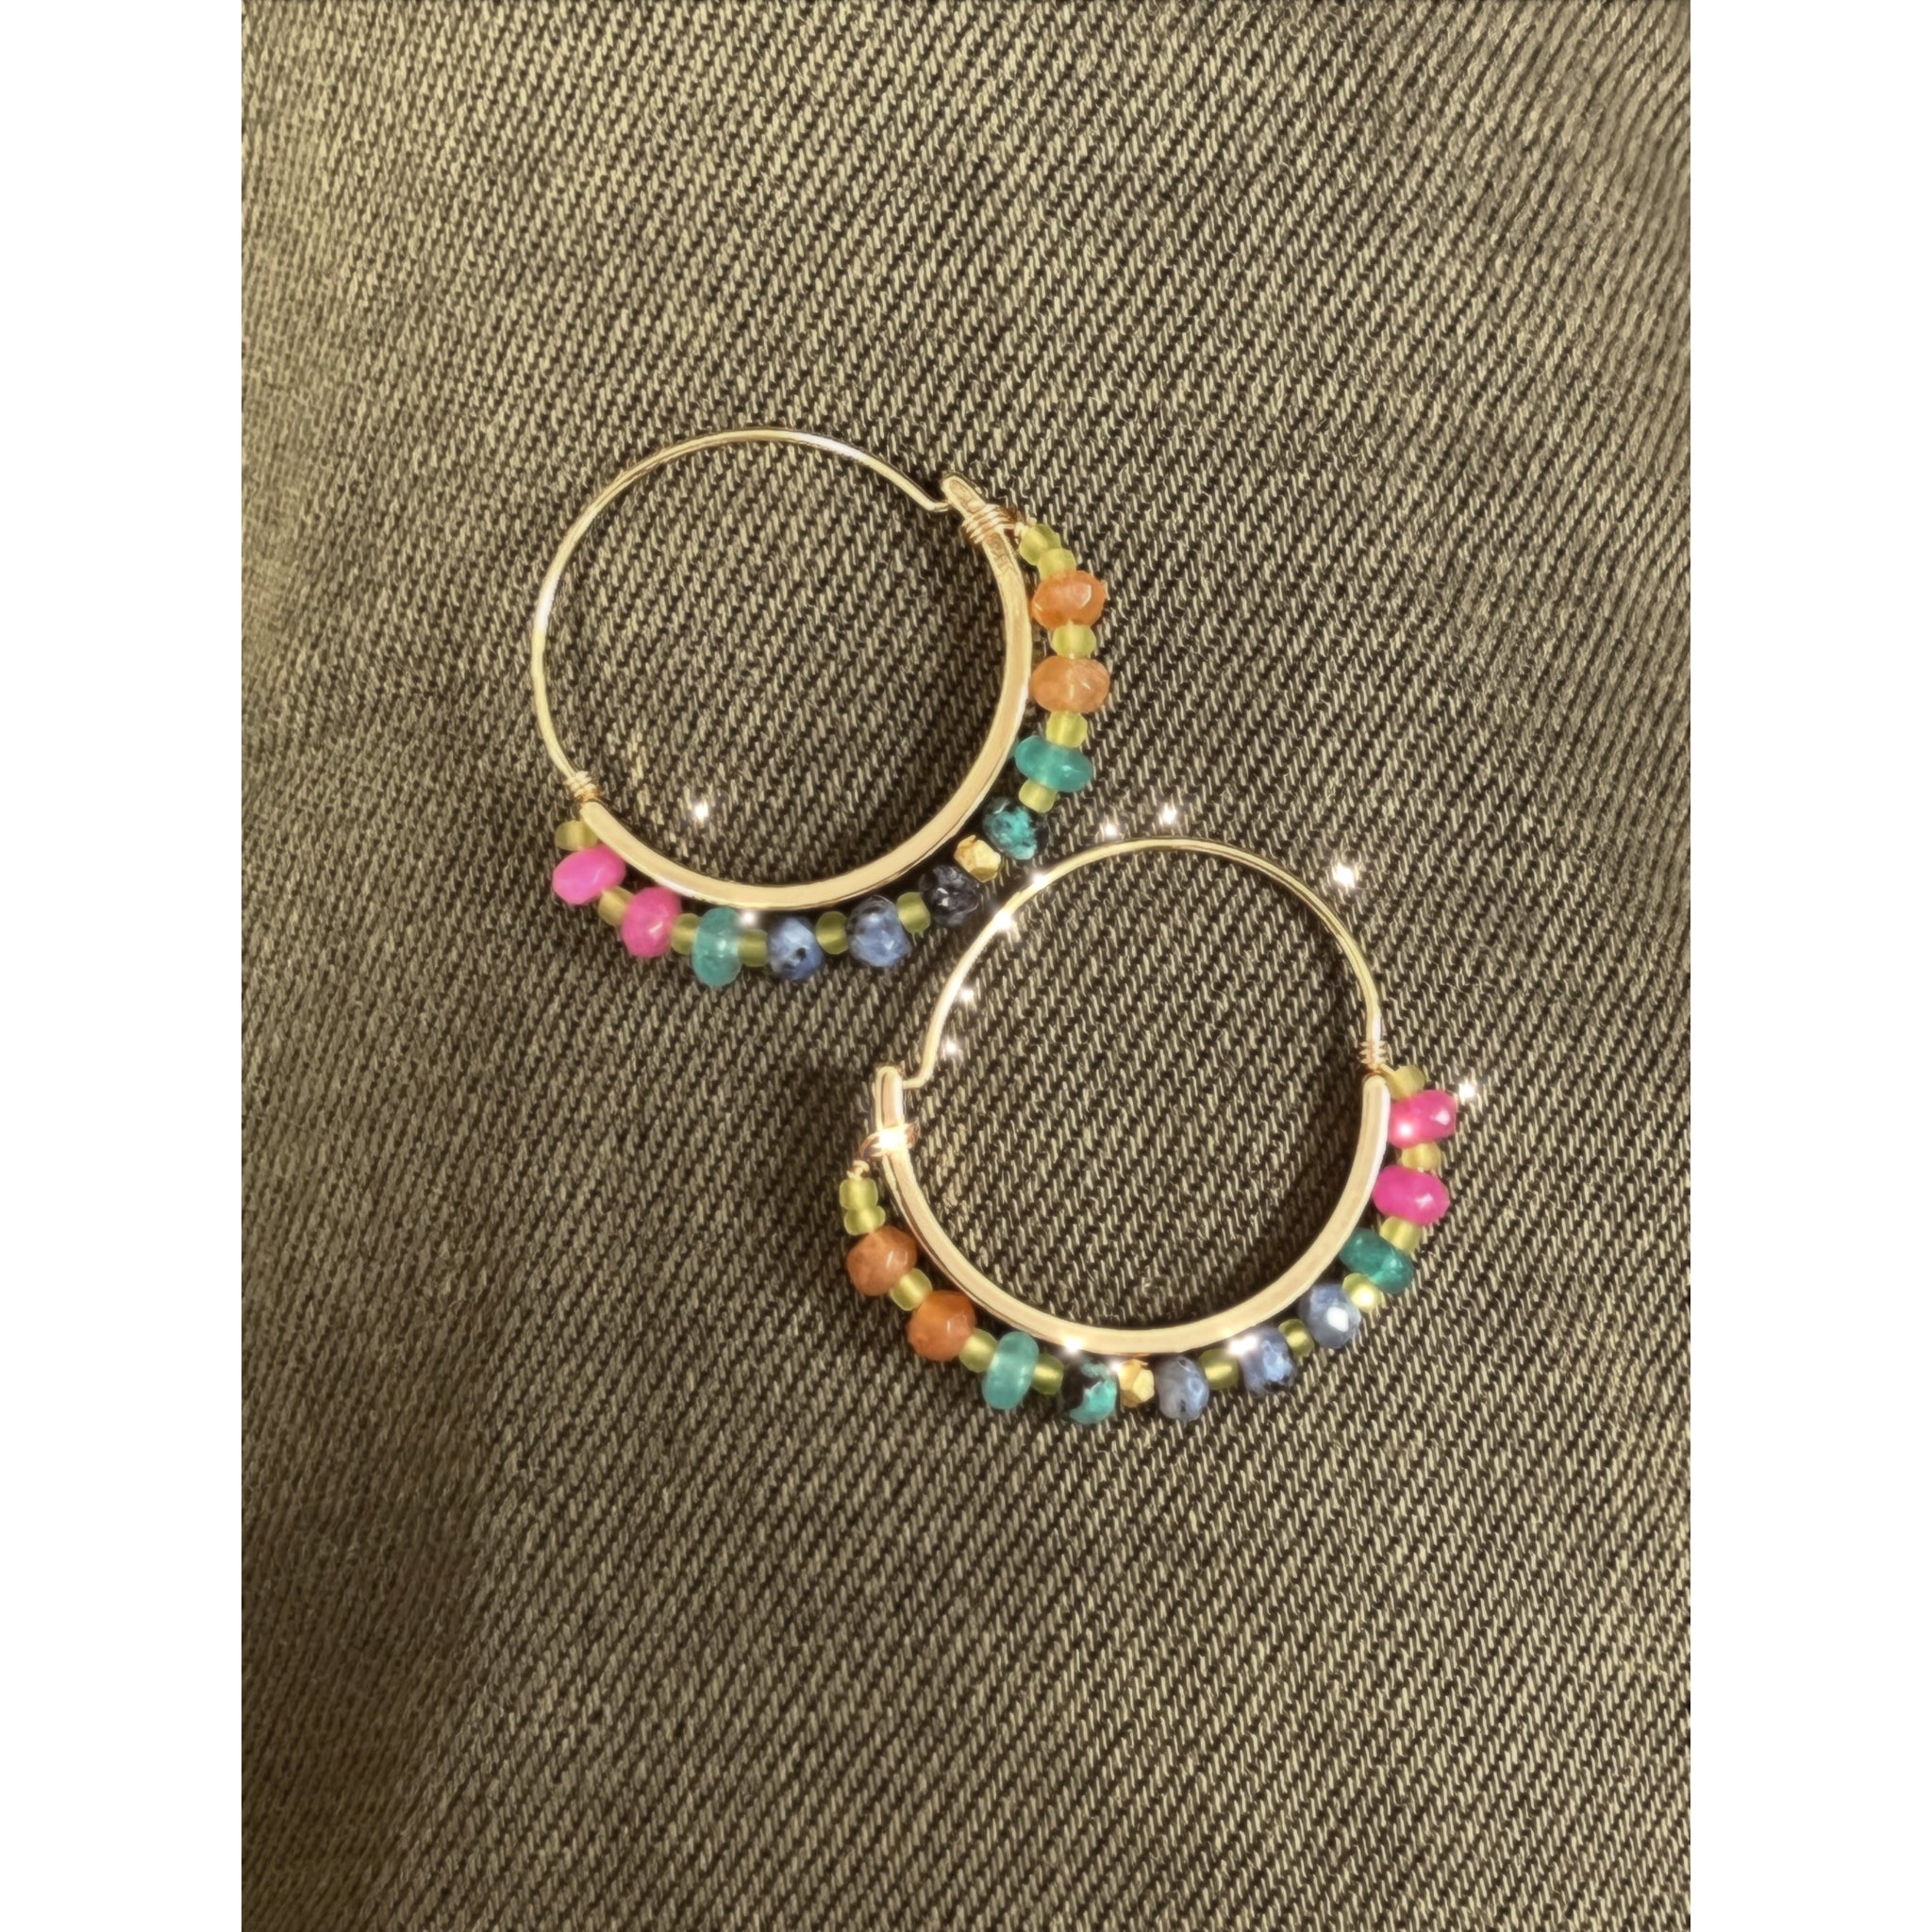 Gold Color Beaded Hoop view showing the hoop shape and different, bright colored  beads